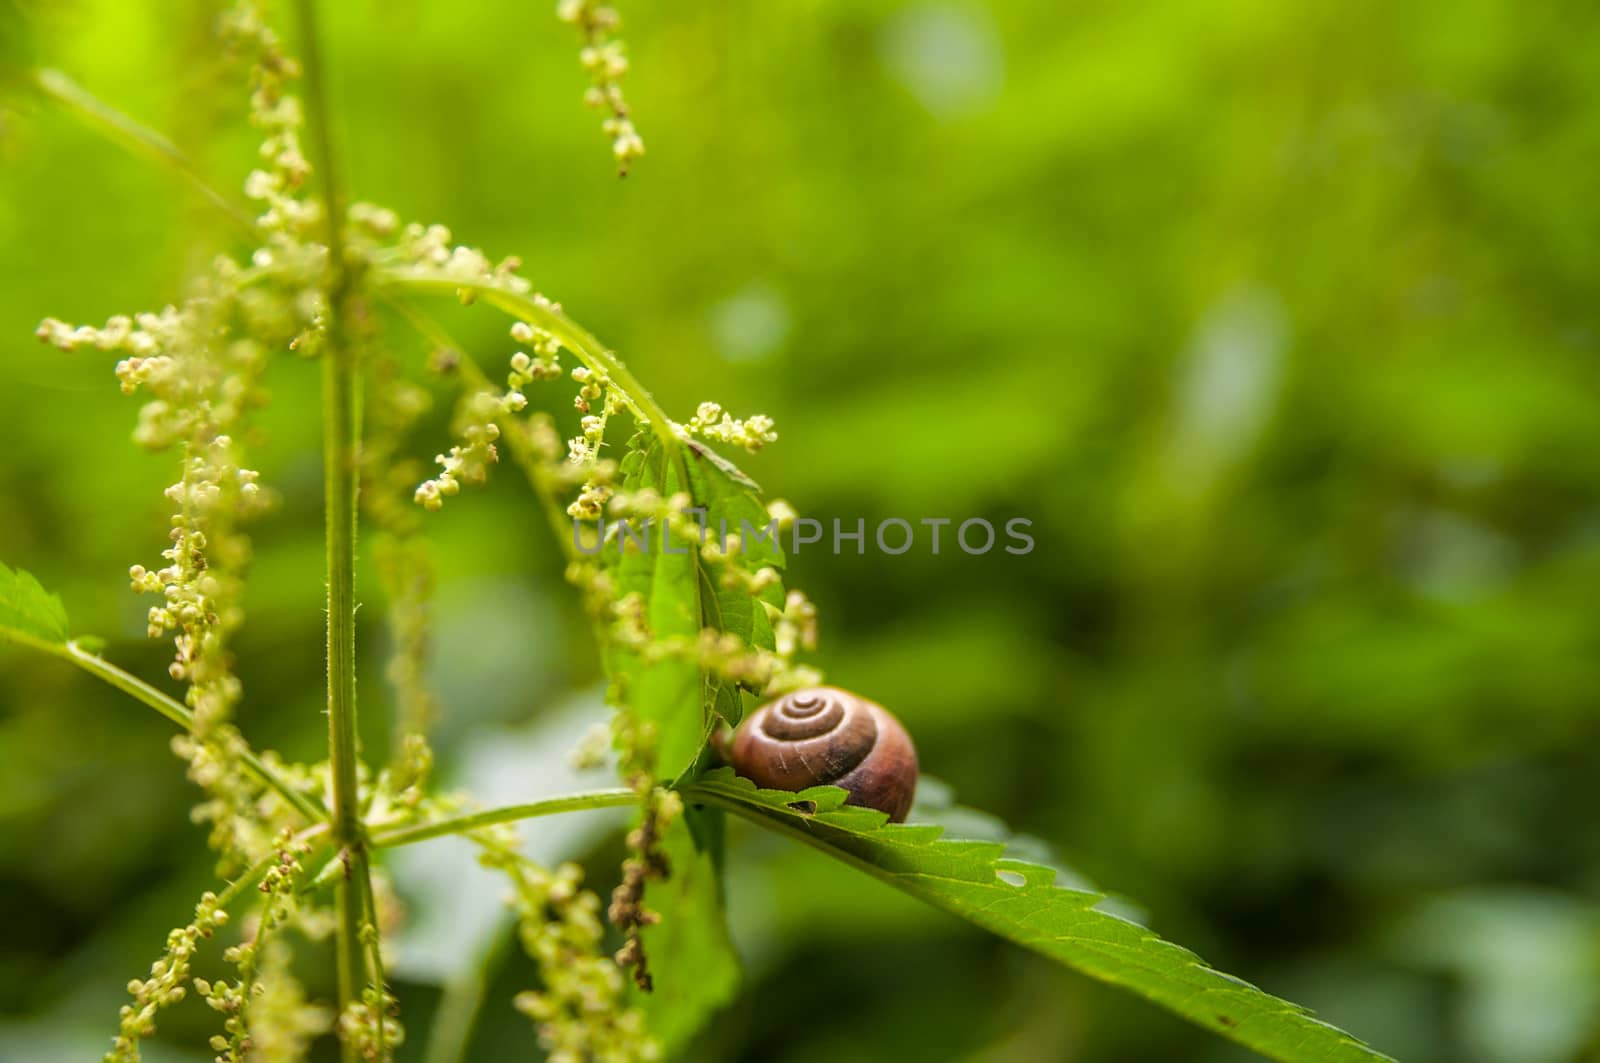 Snail sitting on the leaf of nettle